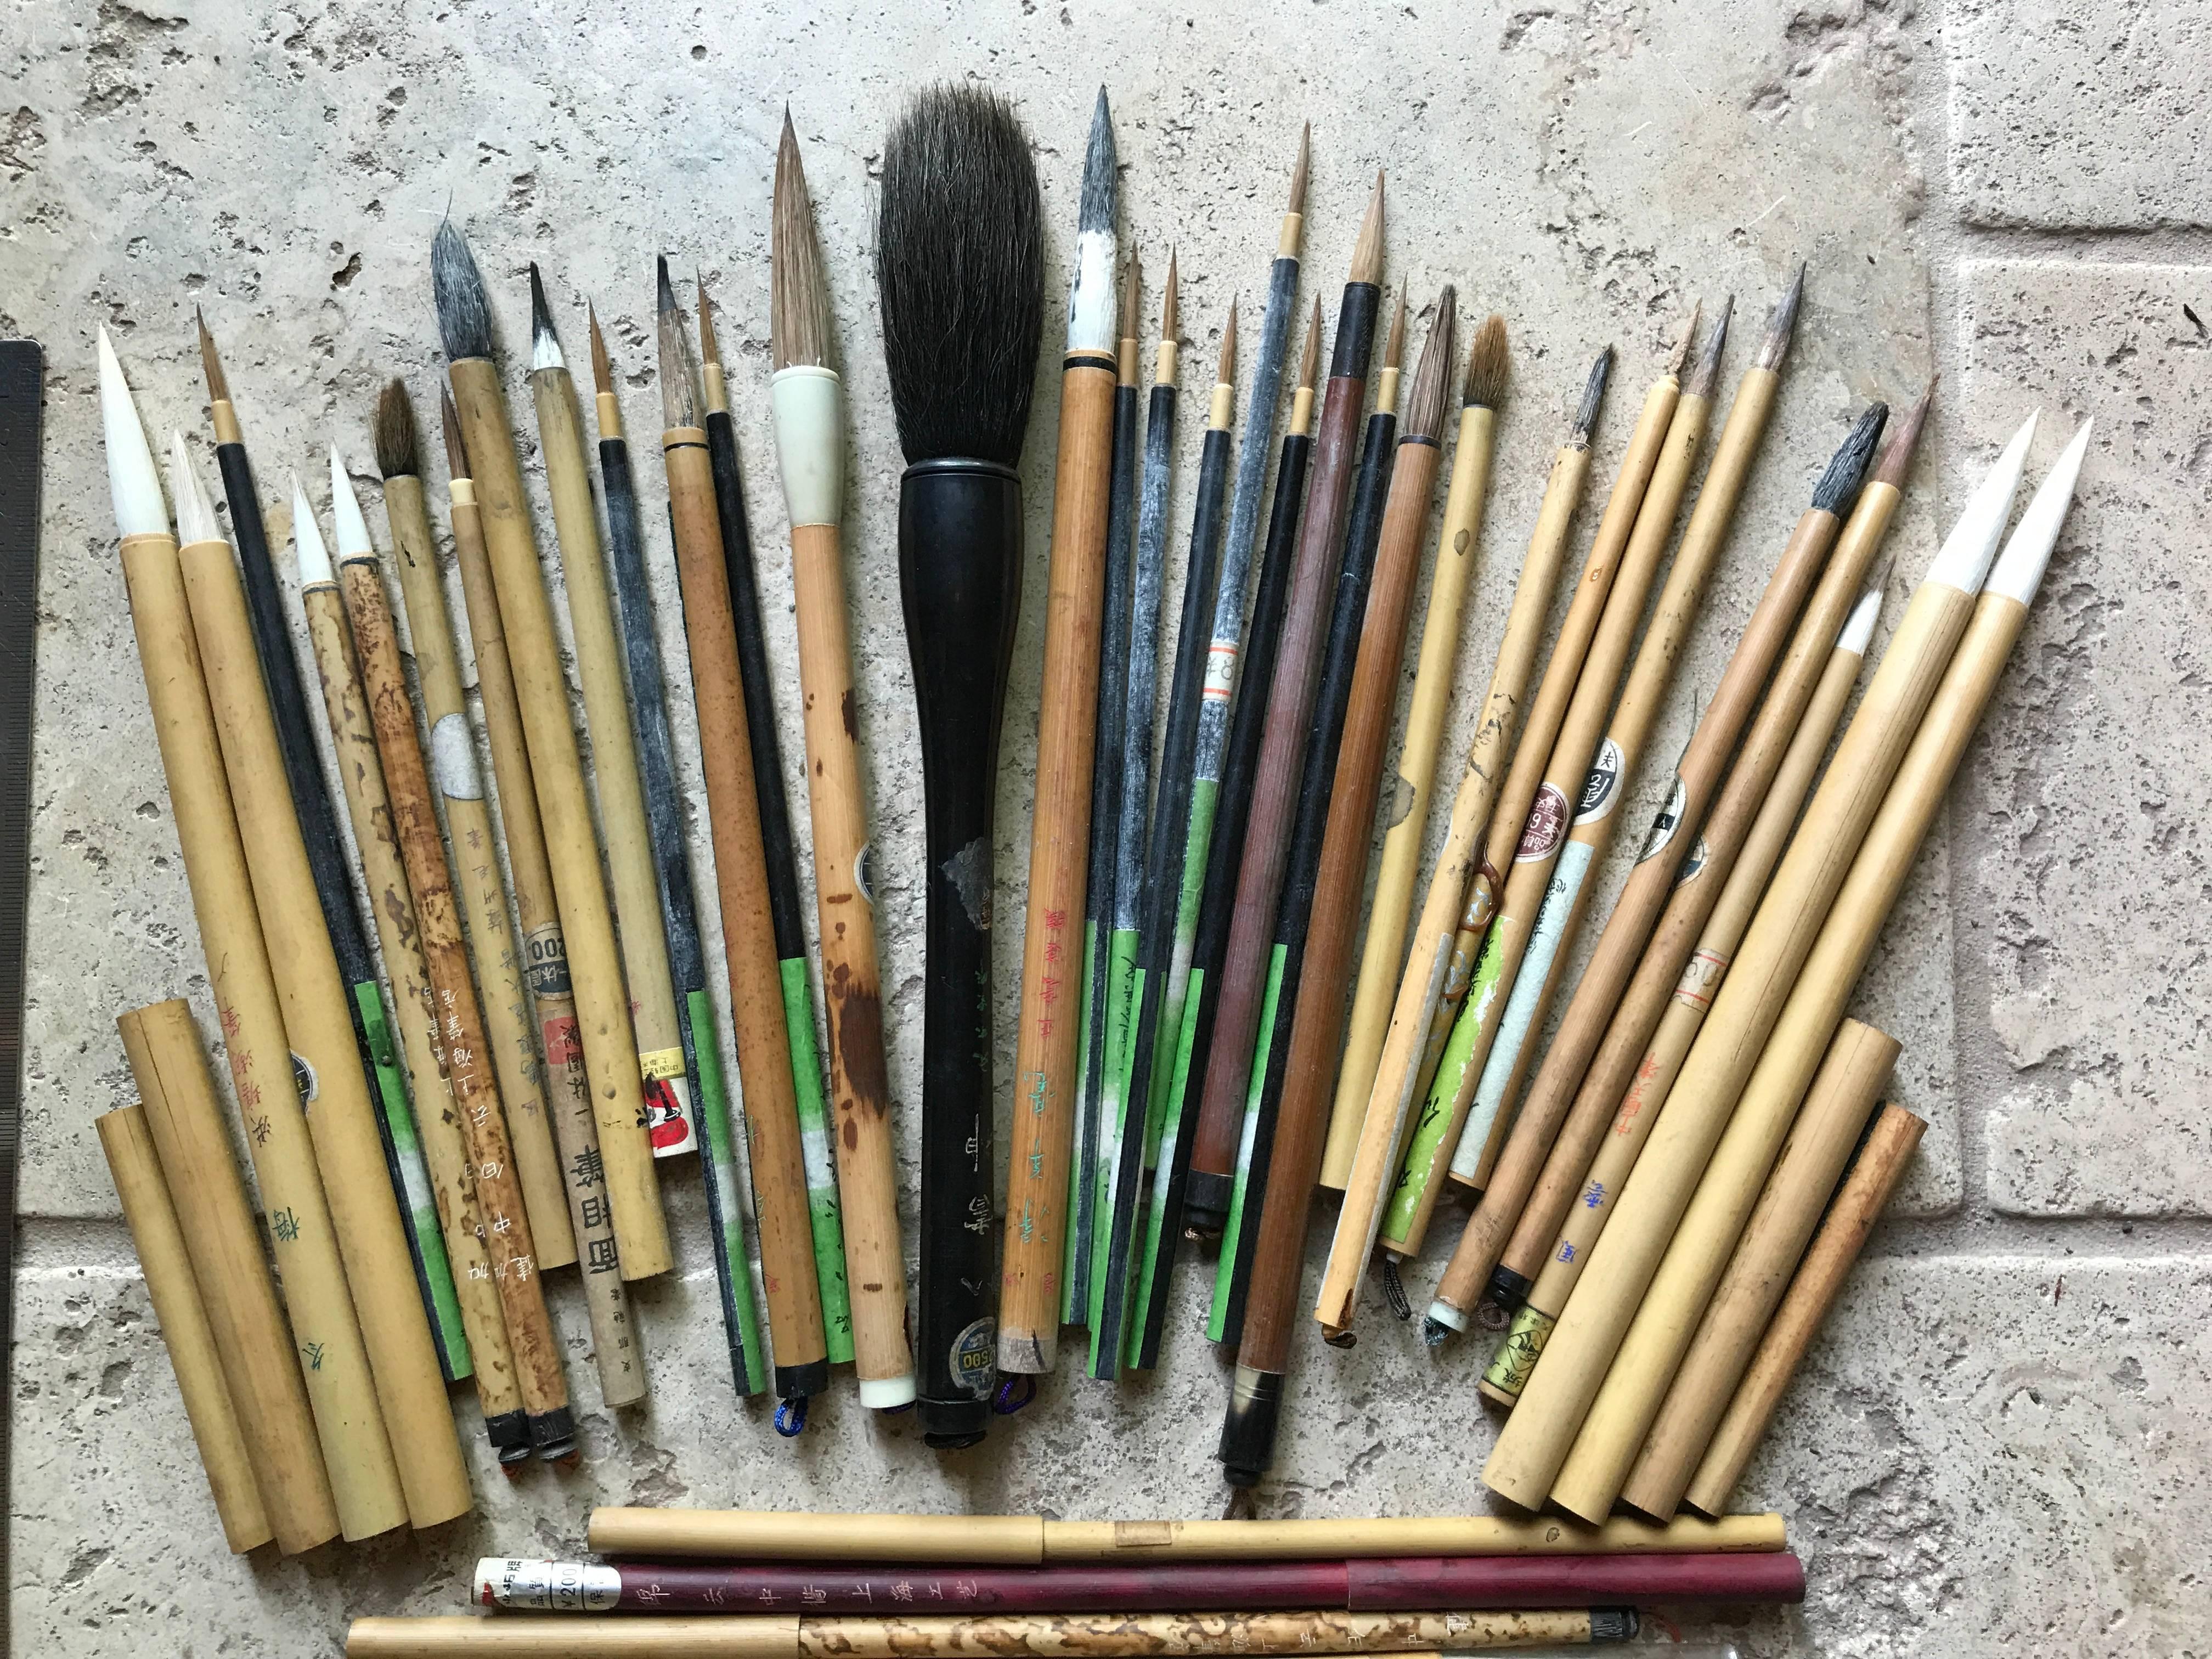 Japanese Found! Antique Artisan's Cache of 43 Old Paint and Calligraphy Bamboo Brushes